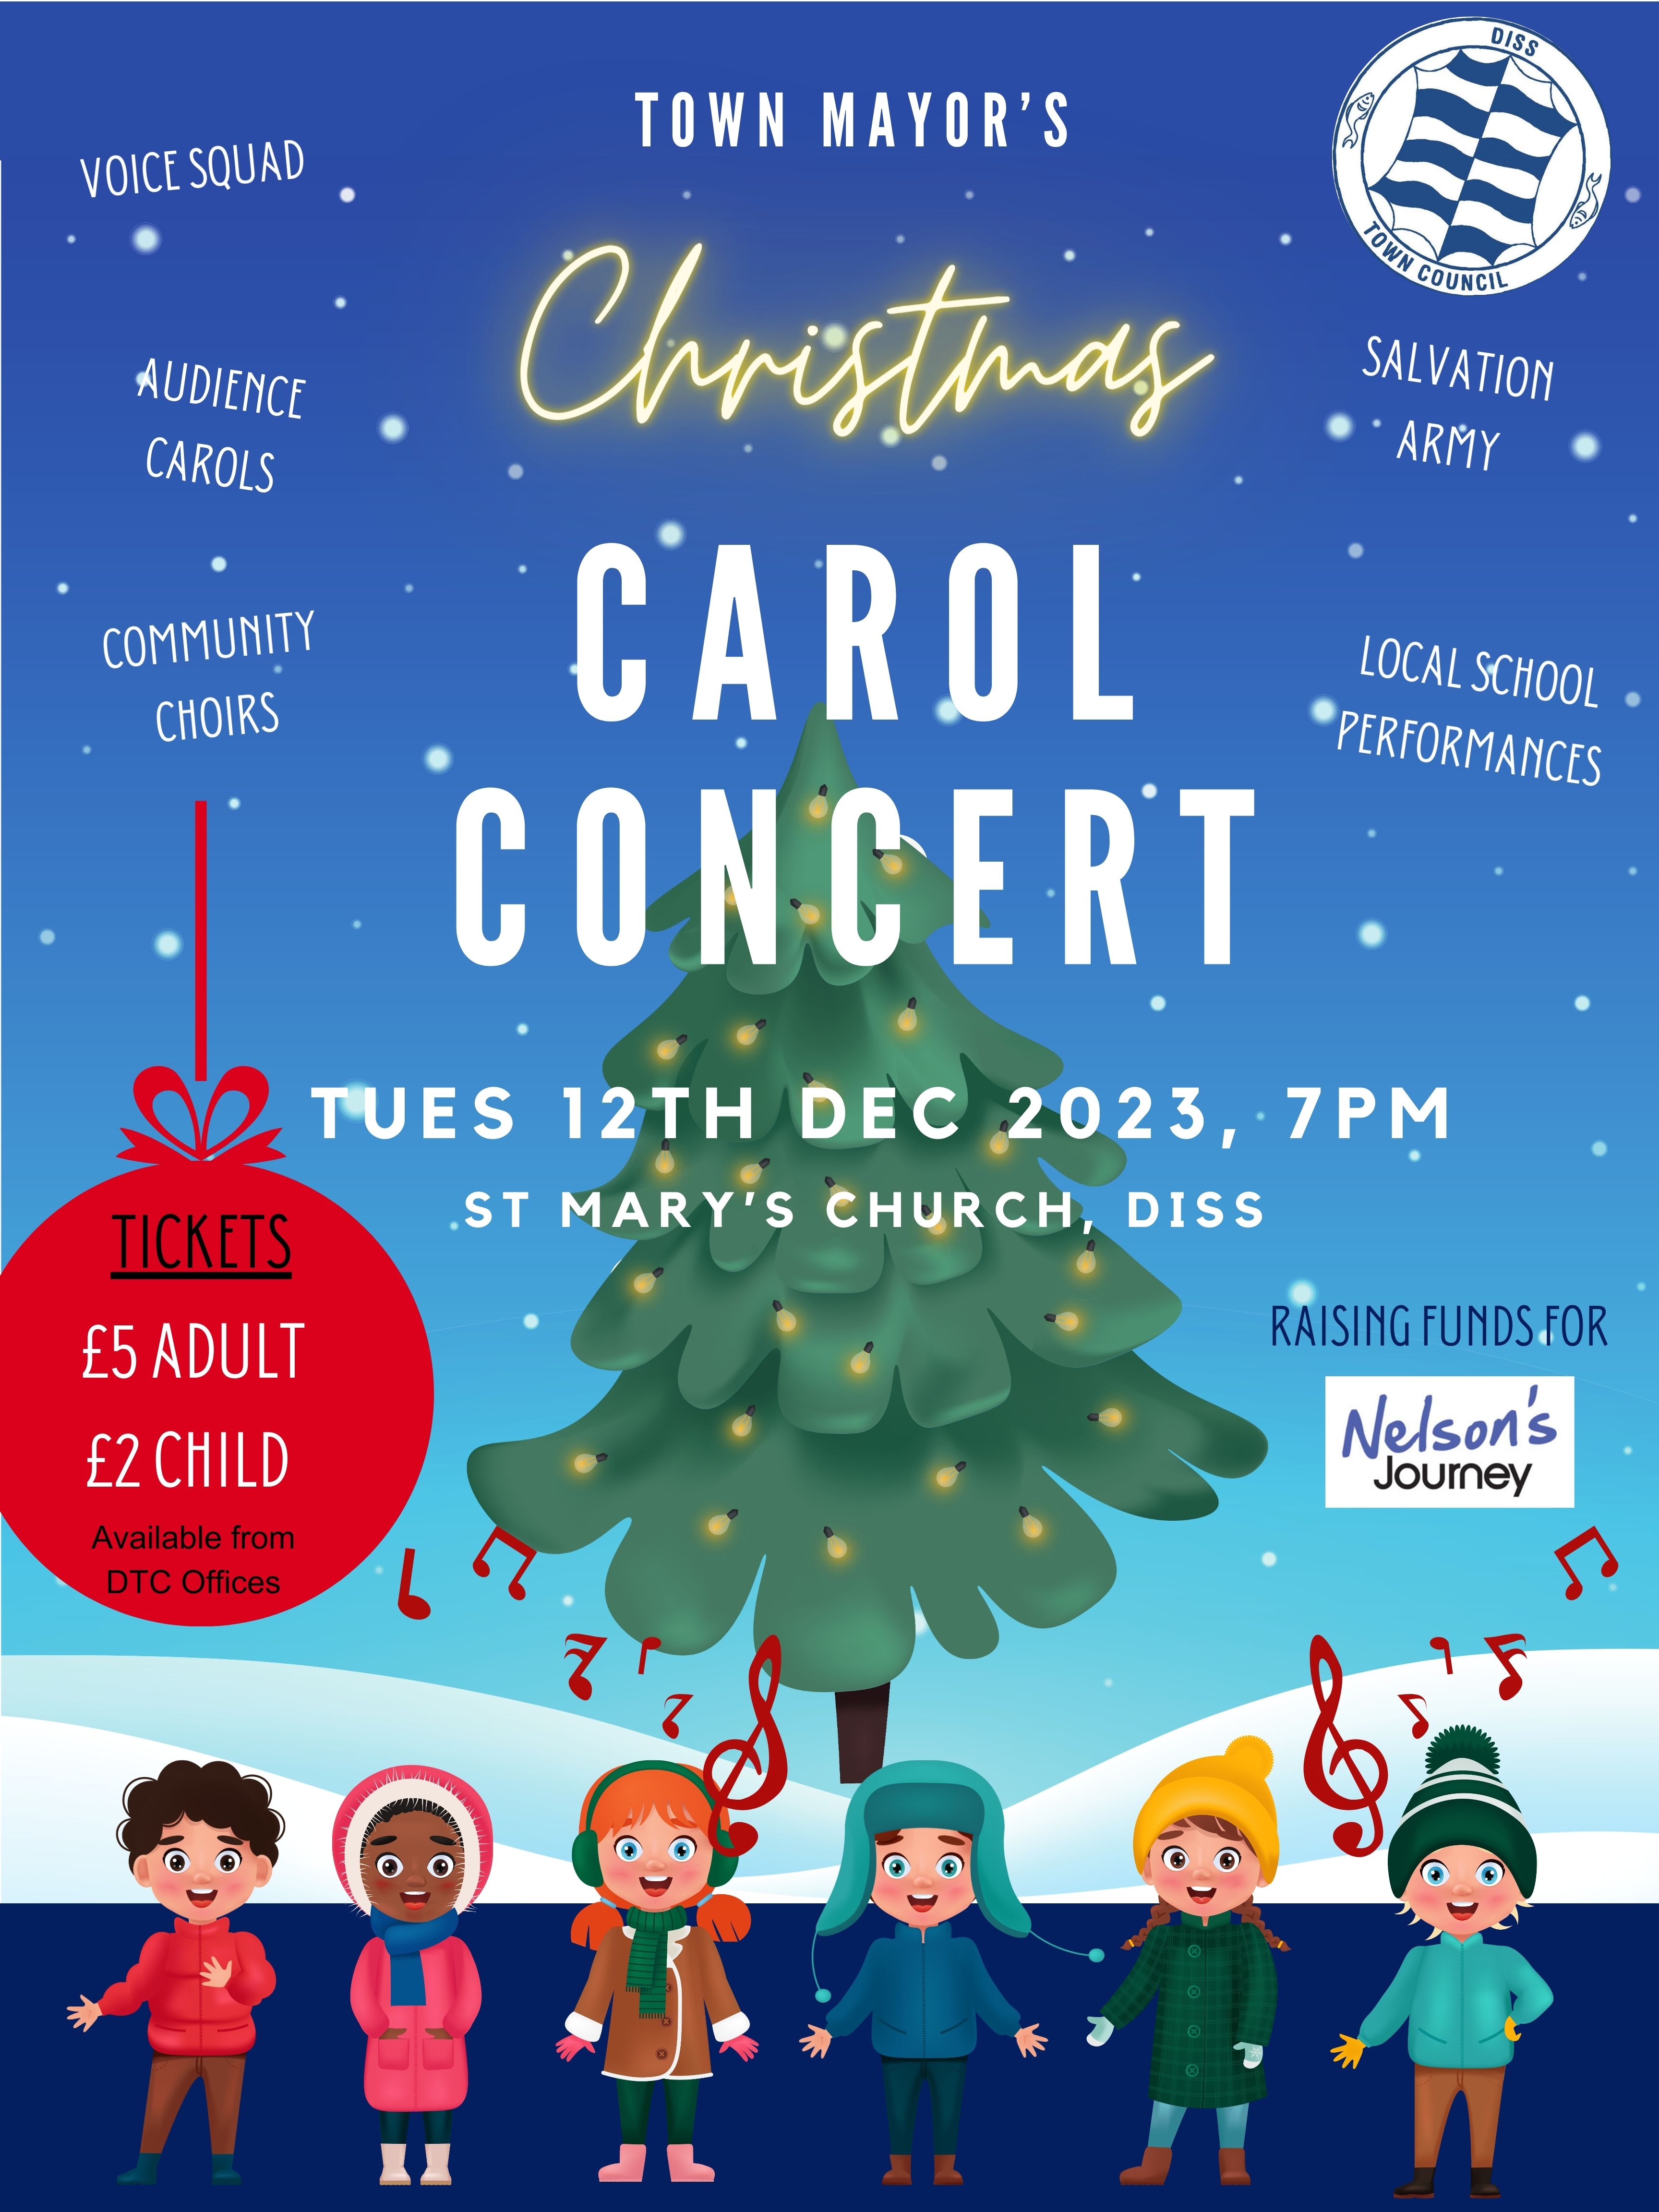 Diss Christmas Carol Concert poster, 12th December 2023, 7pm. Tickets from Diss Town Council Office